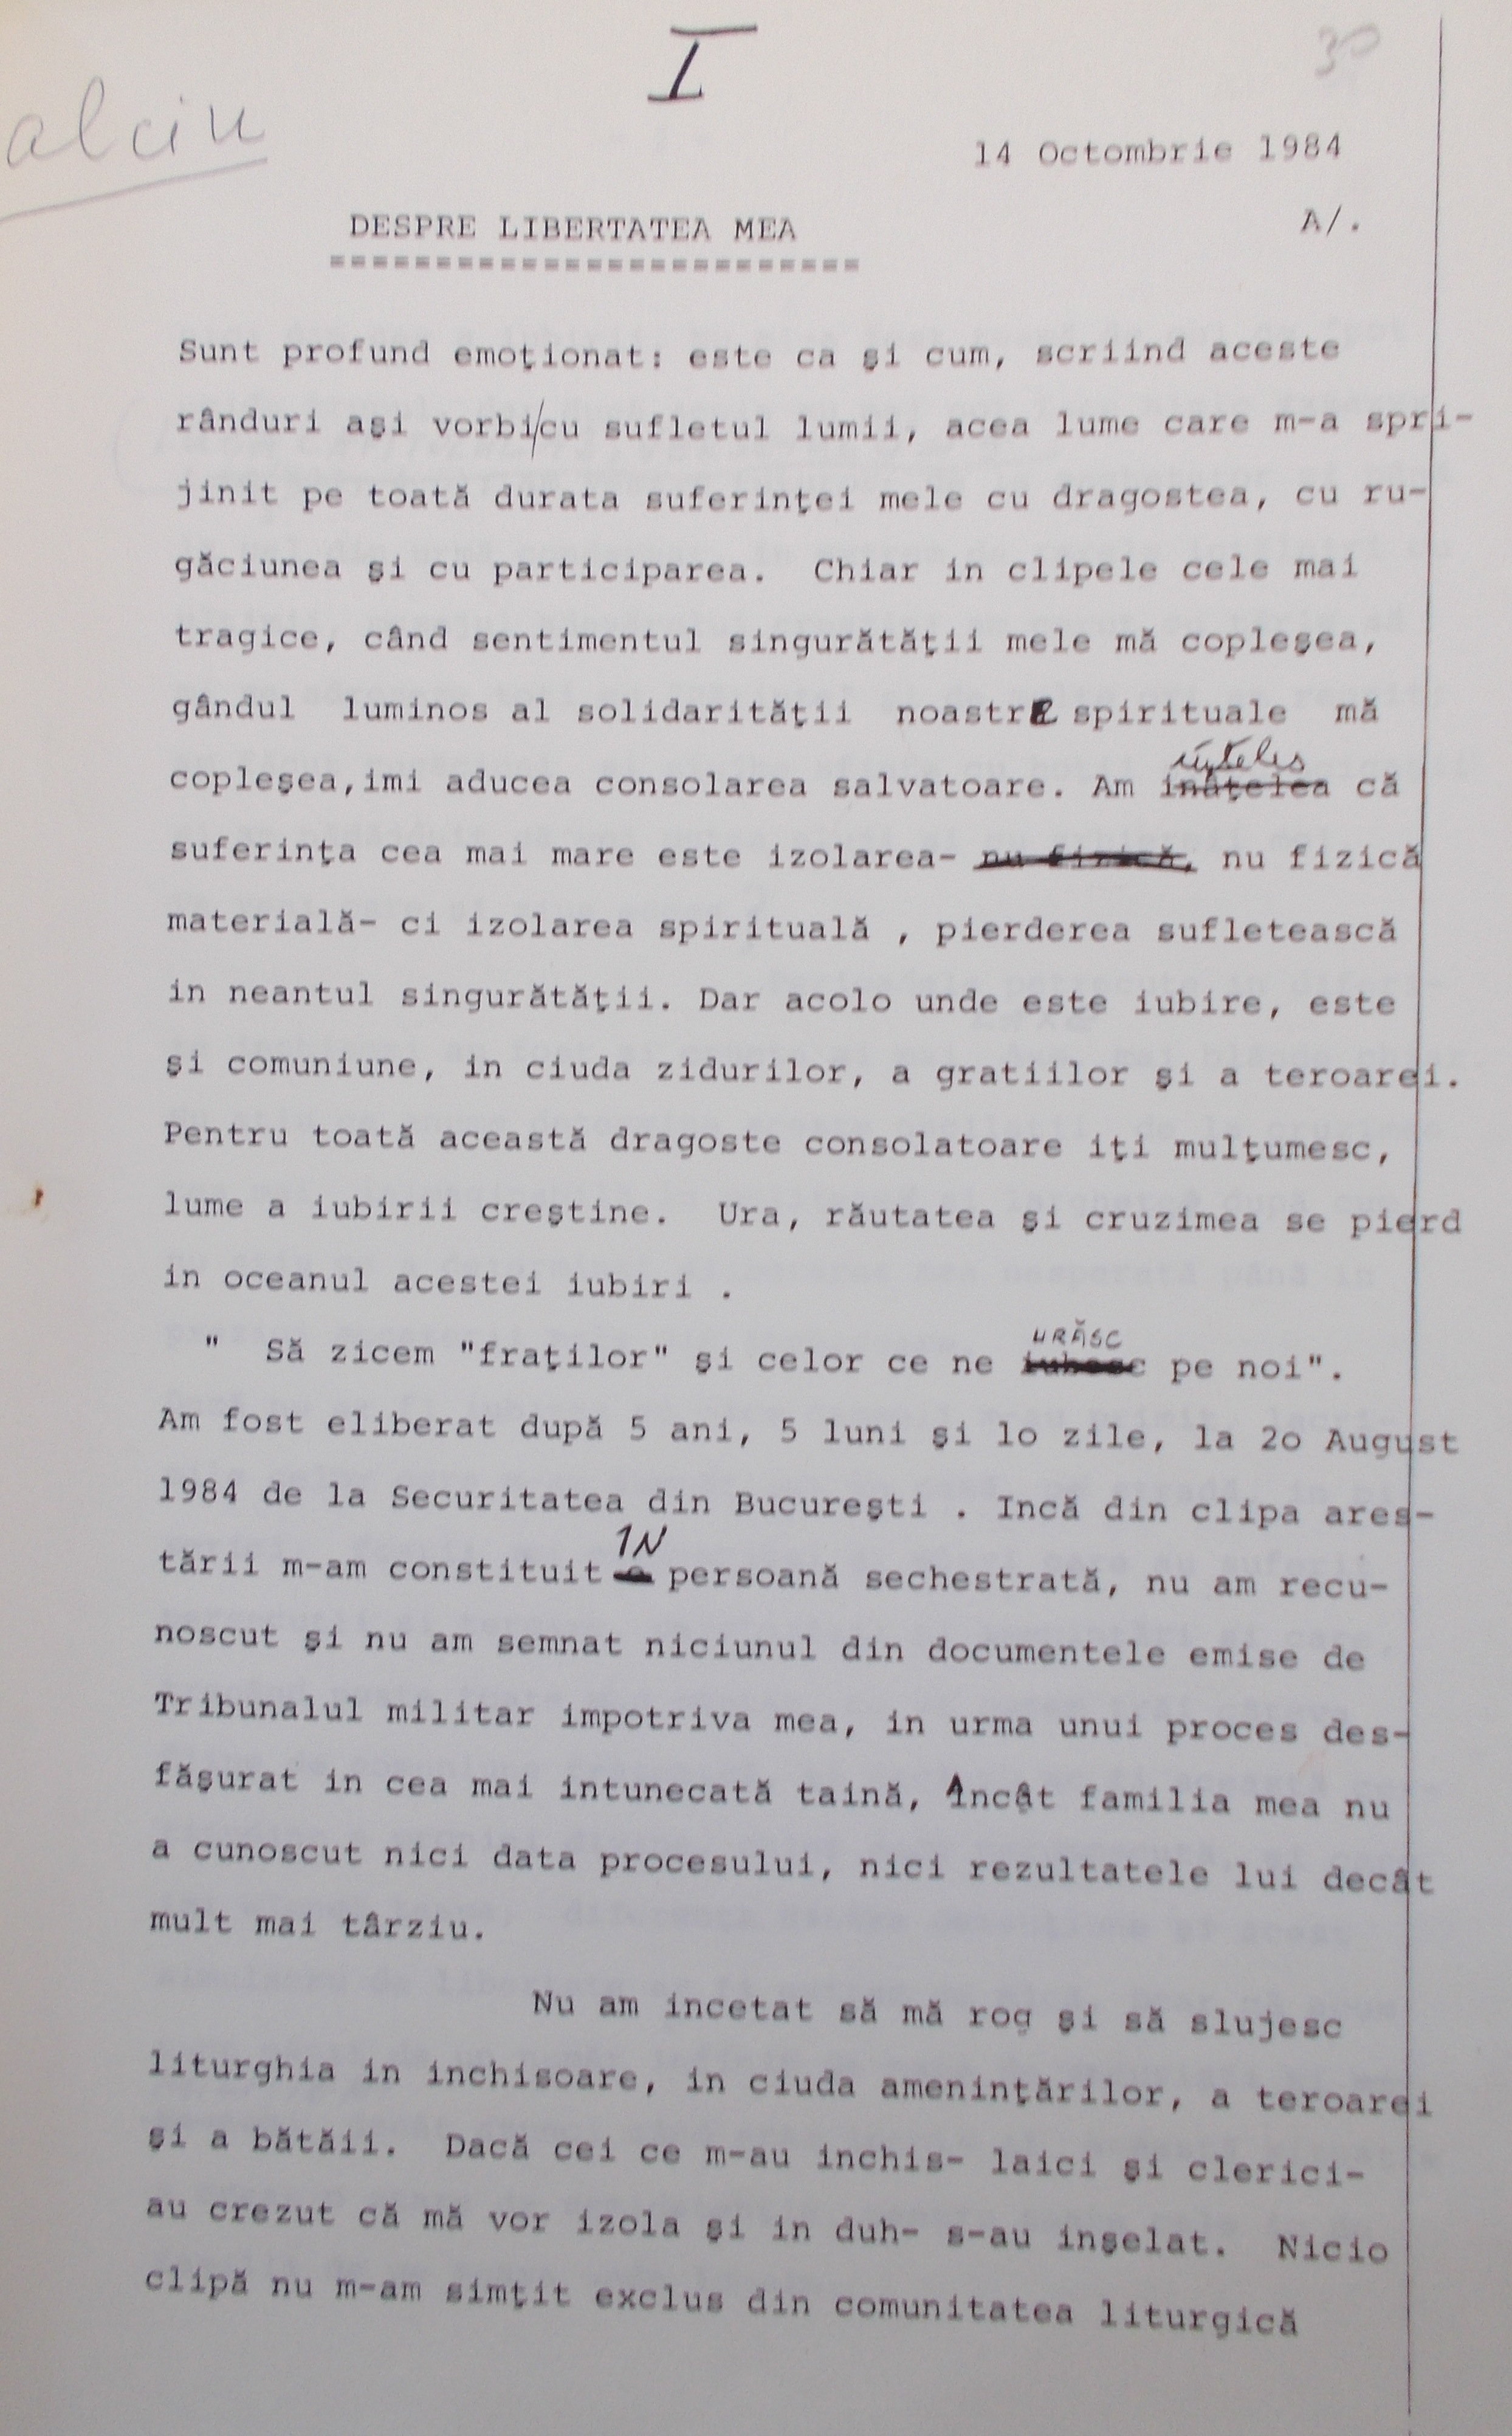 The first page of the letter to RFE sent by Calciu–Dumitreasa in October 1984